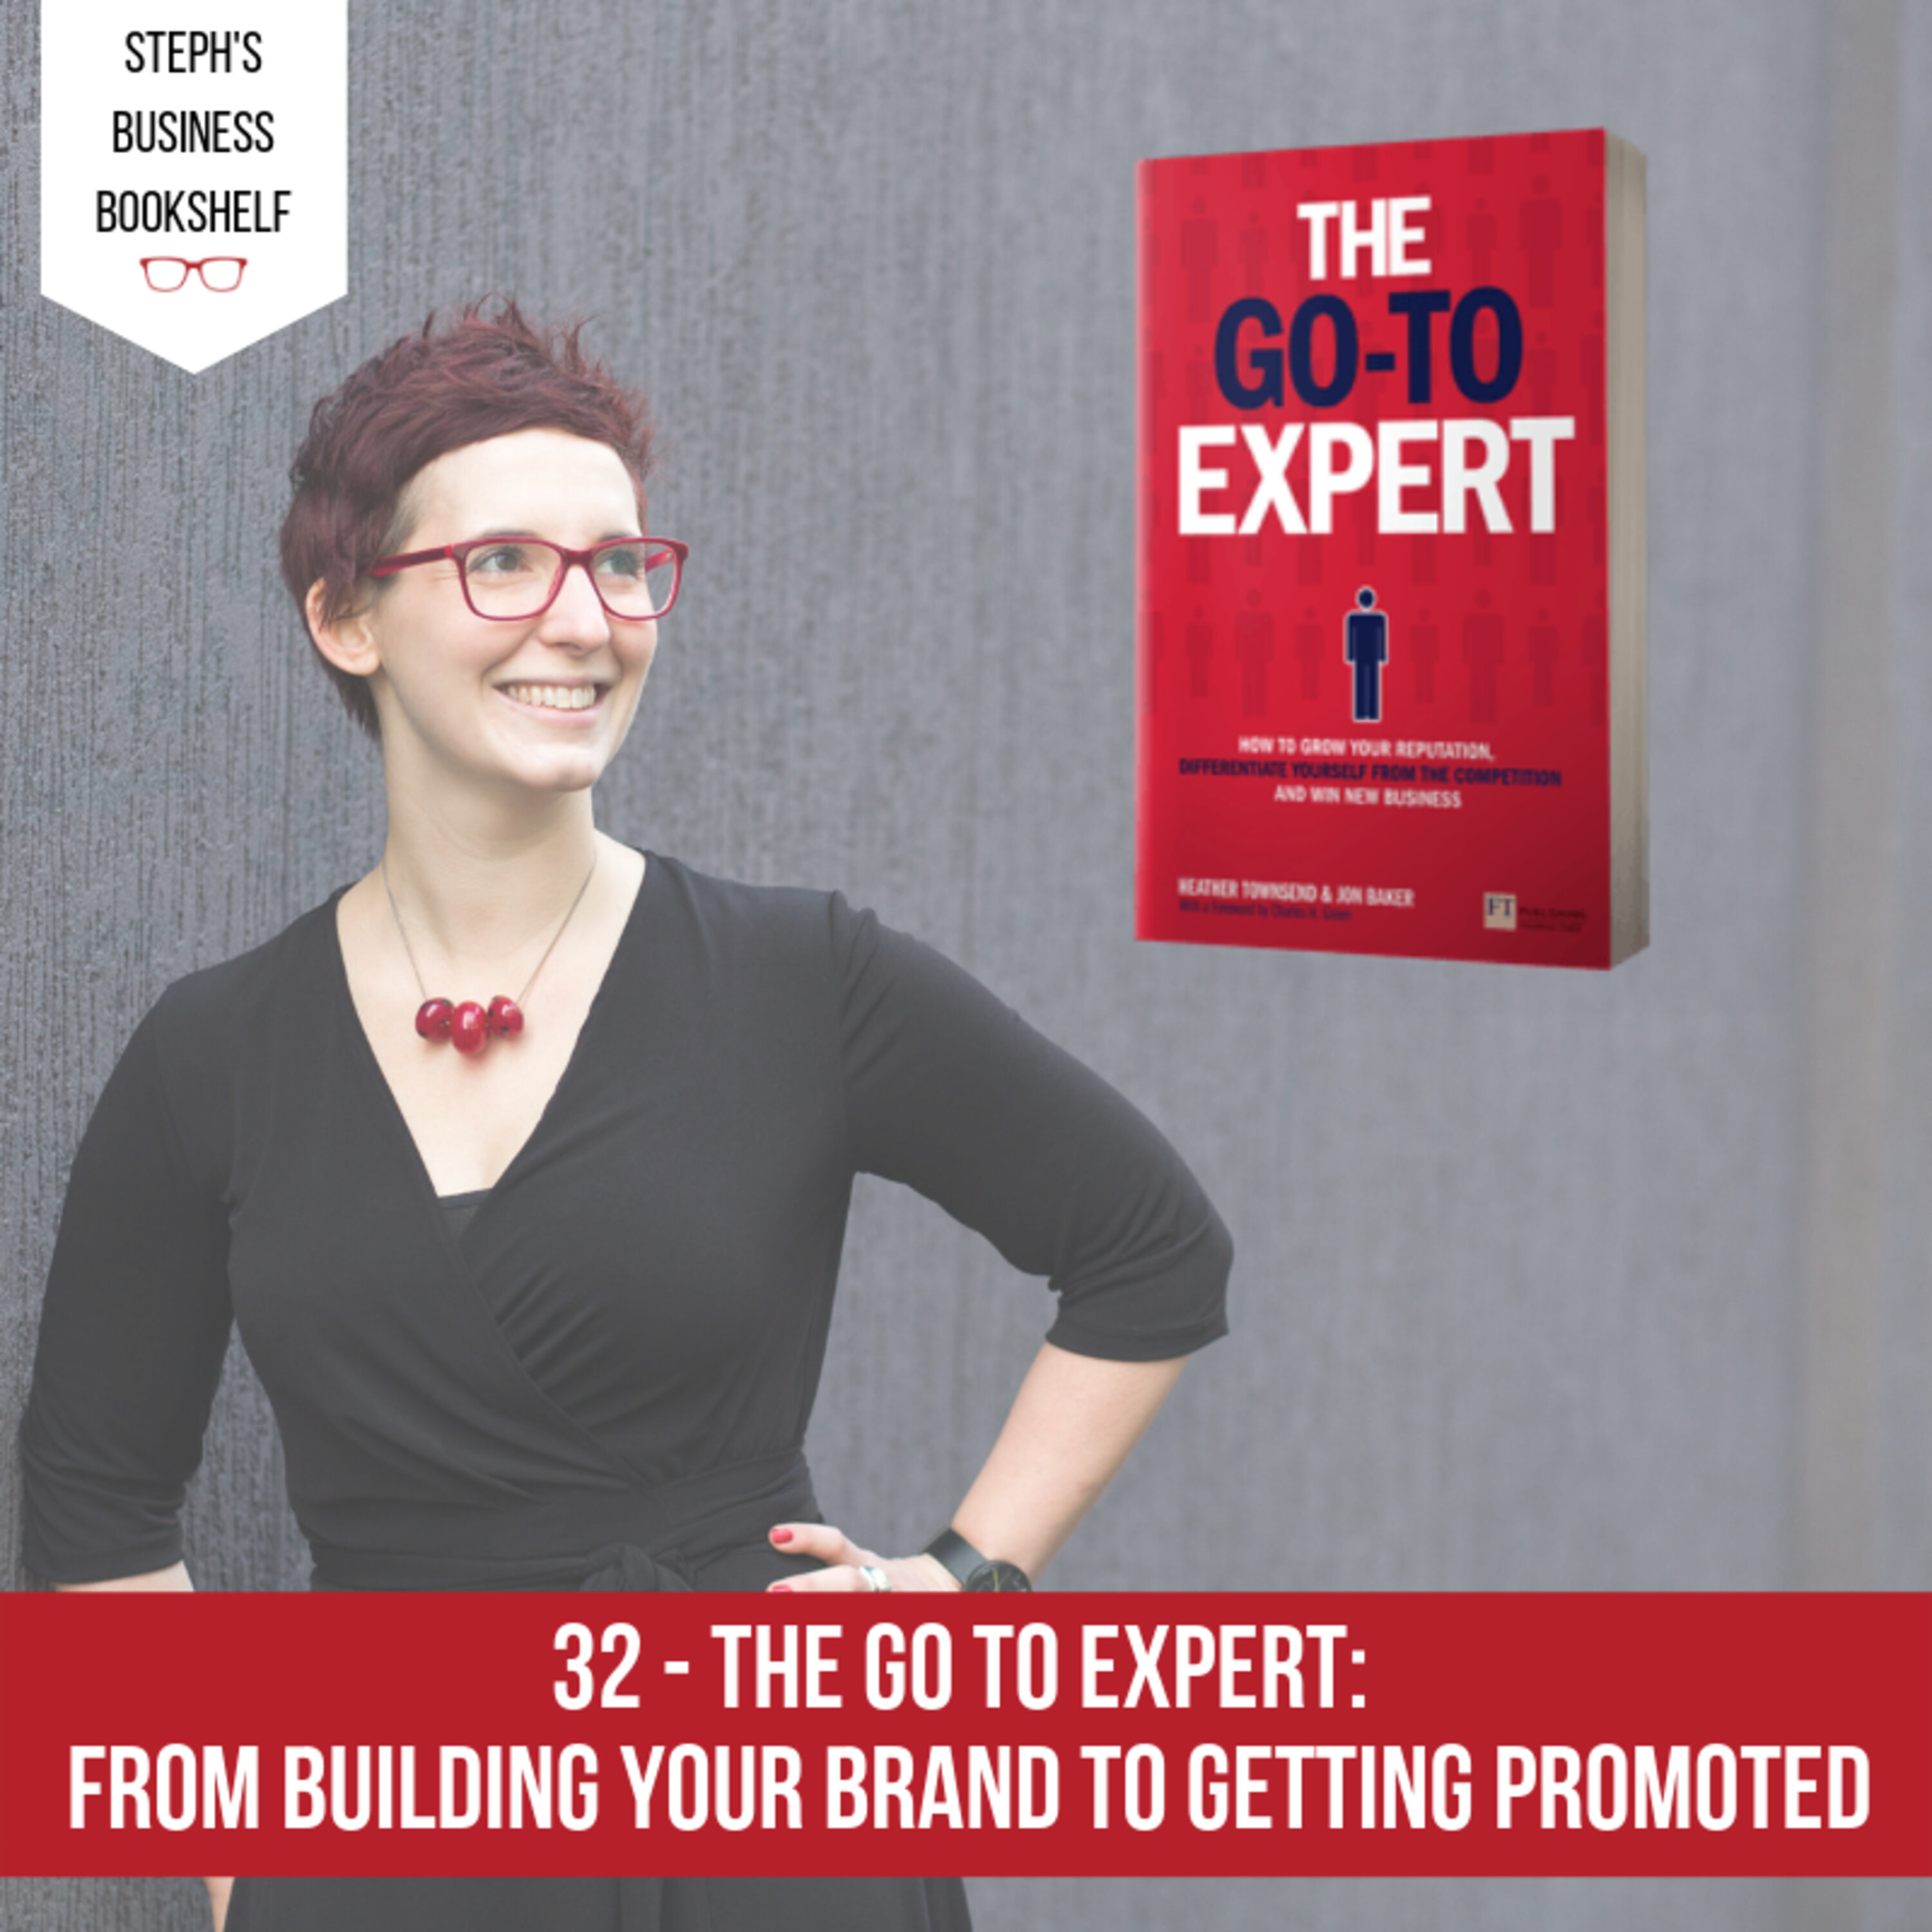 The Go To Expert by Heather Townsend & Jon Baker: From building your brand to getting promoted Image